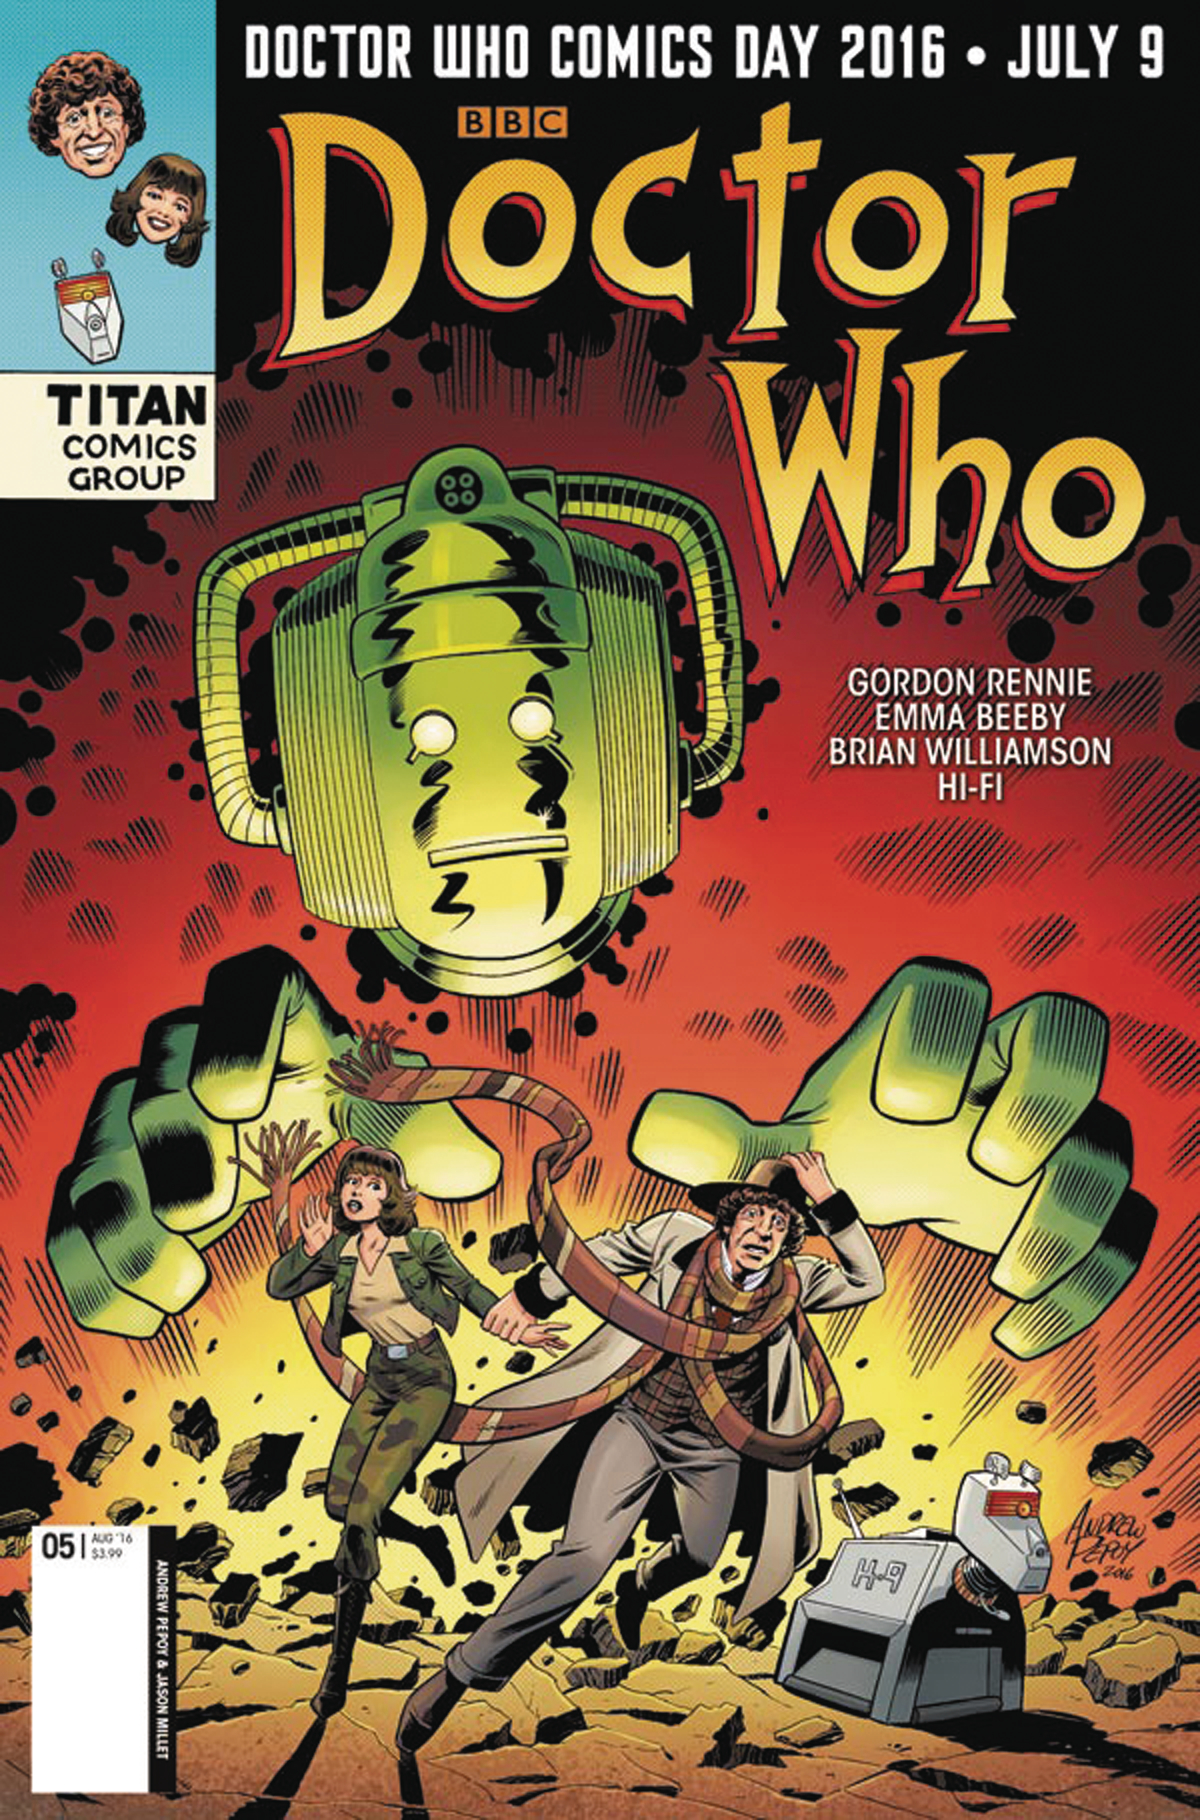 DOCTOR WHO 4TH #4 (OF 5) CVR F DOCTOR WHO DAY